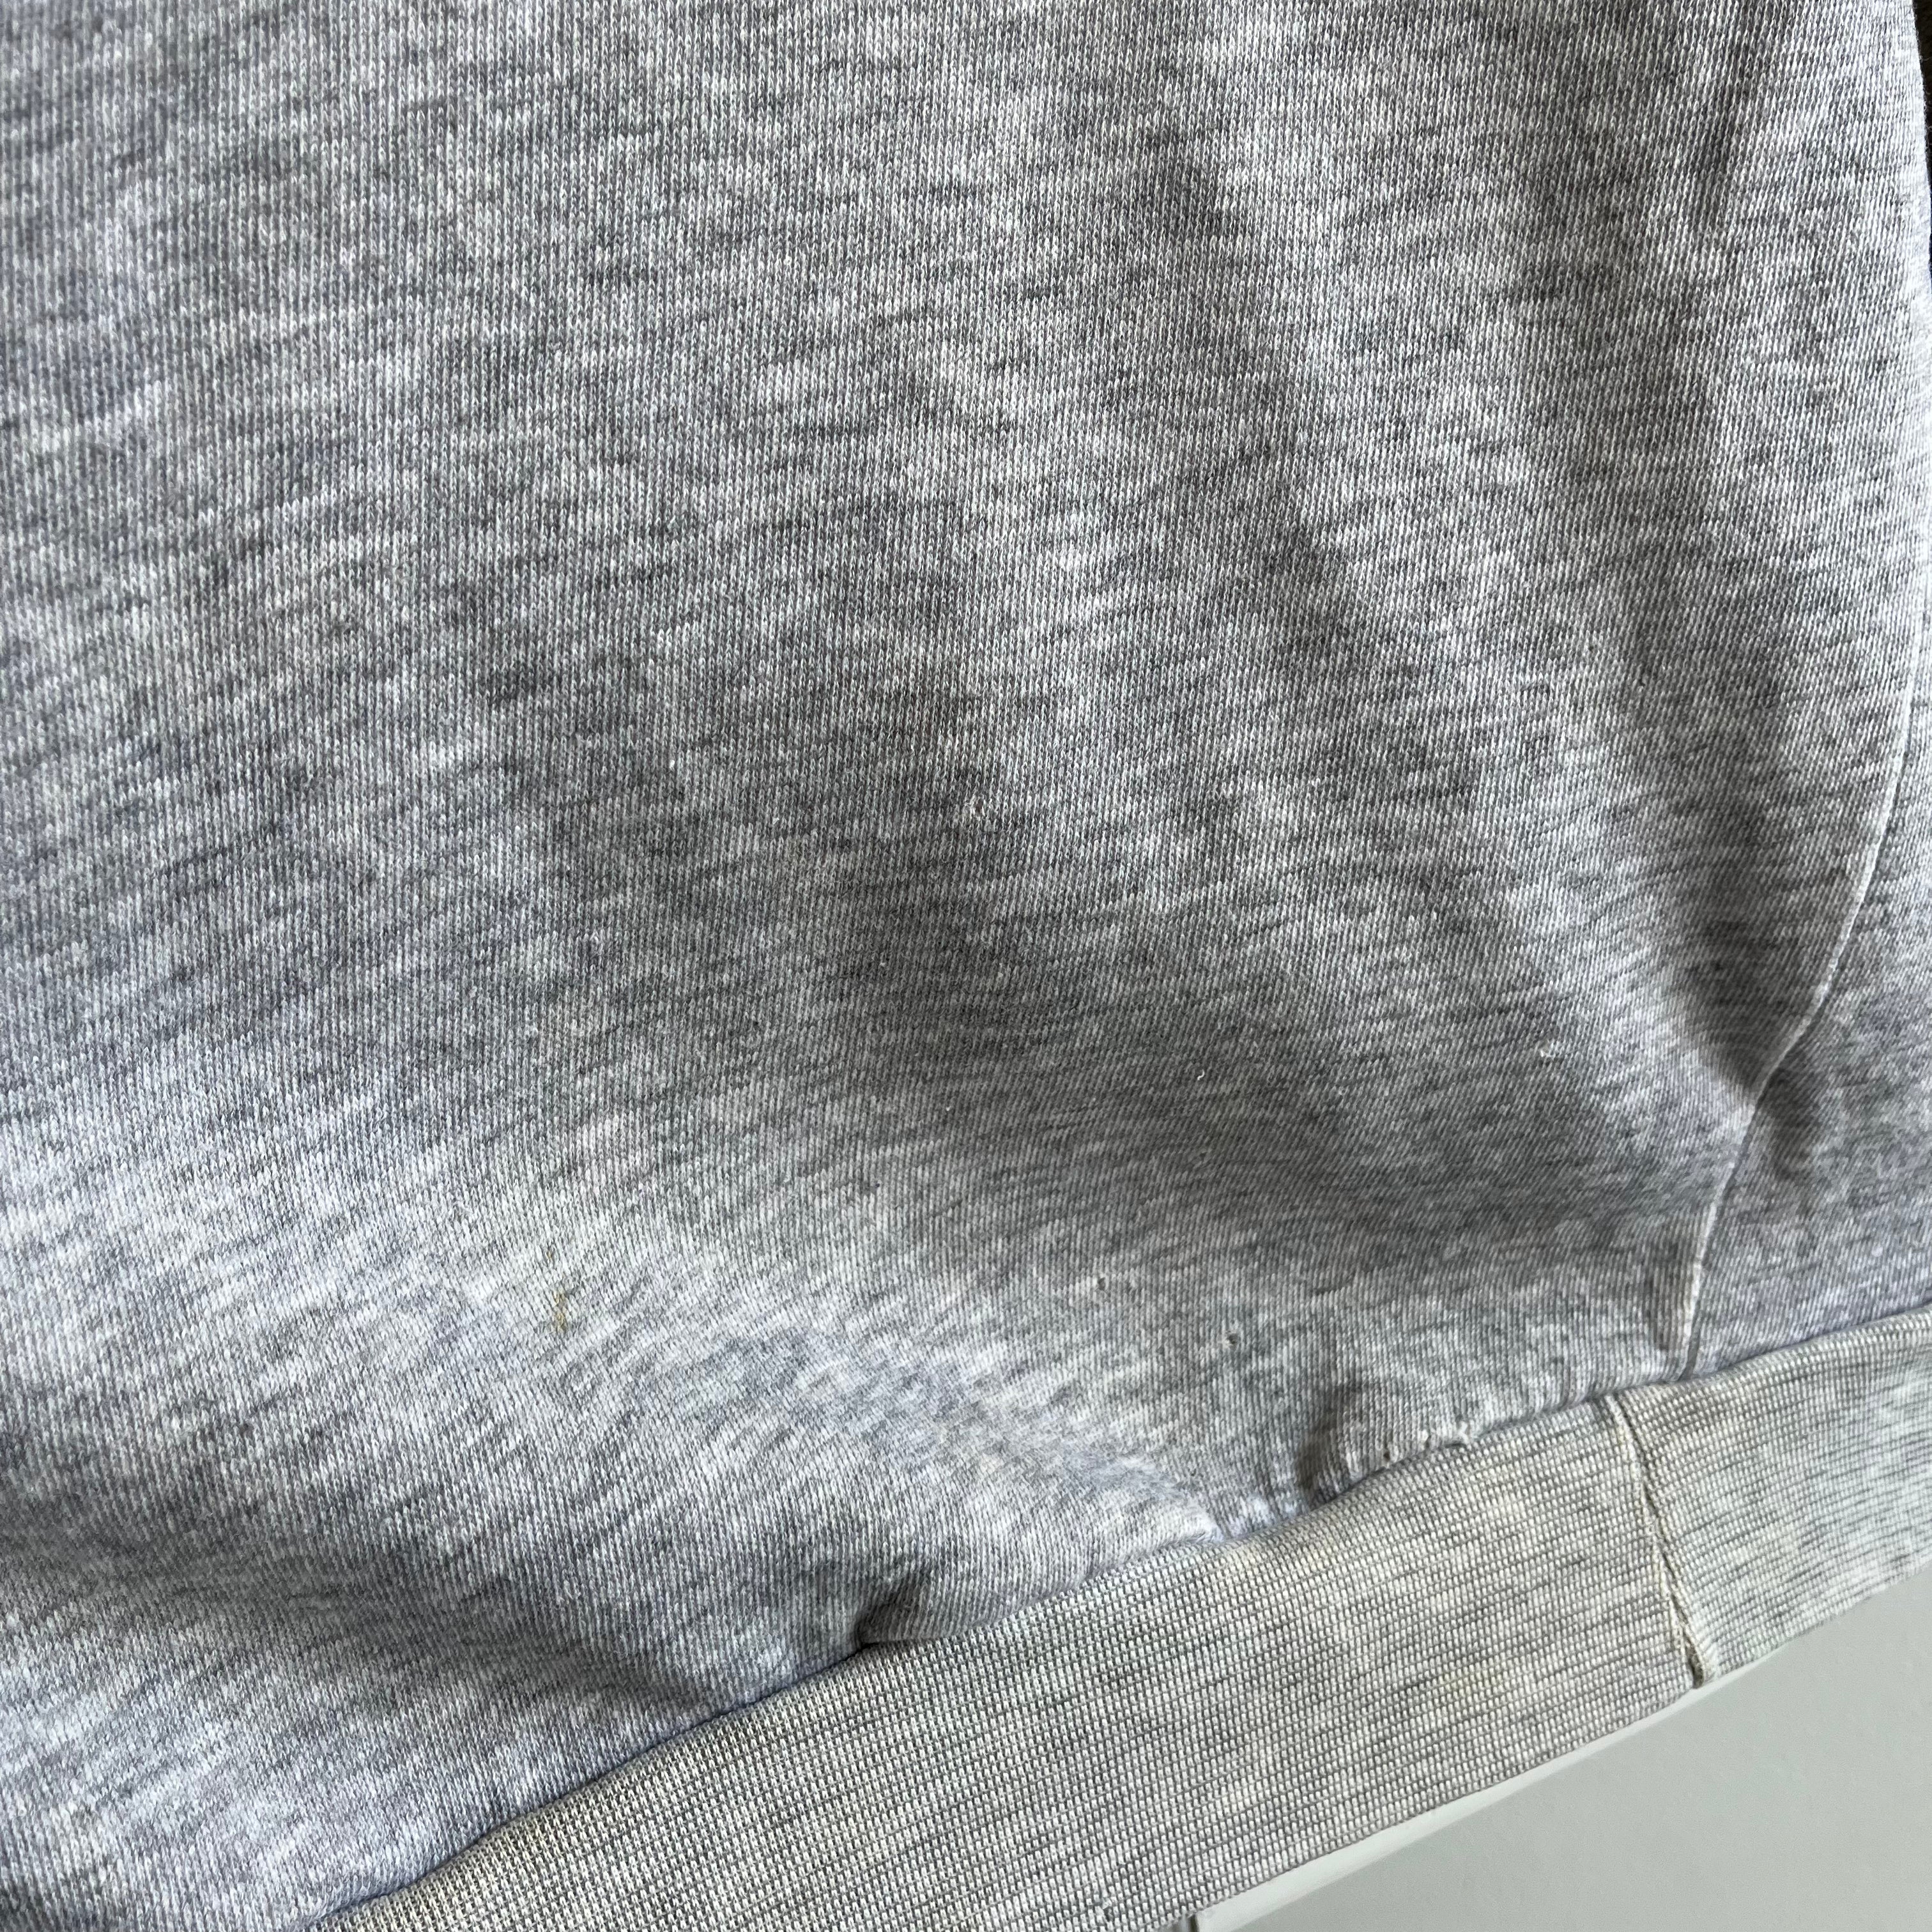 1980s Cut Neck Blank Gray Raglan by Action